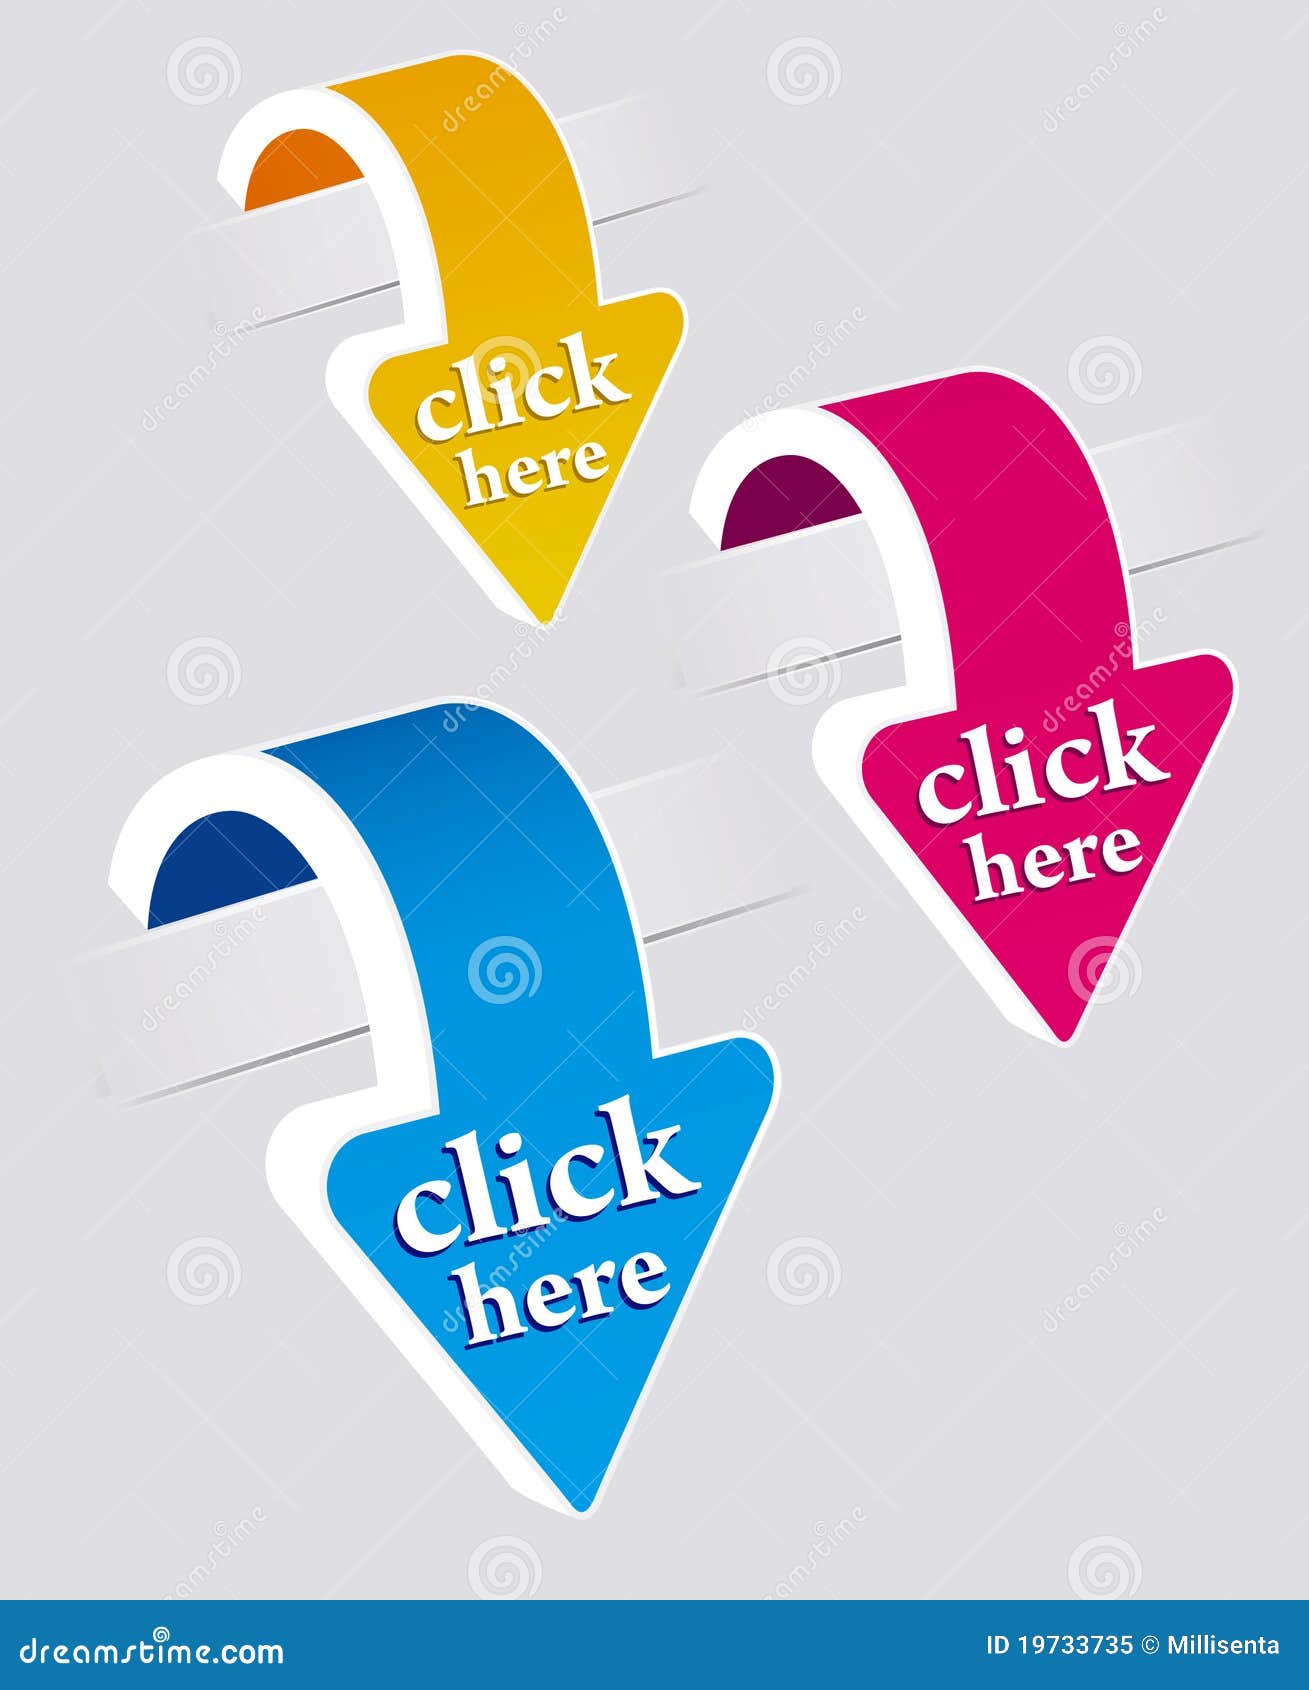 click here stickers set.